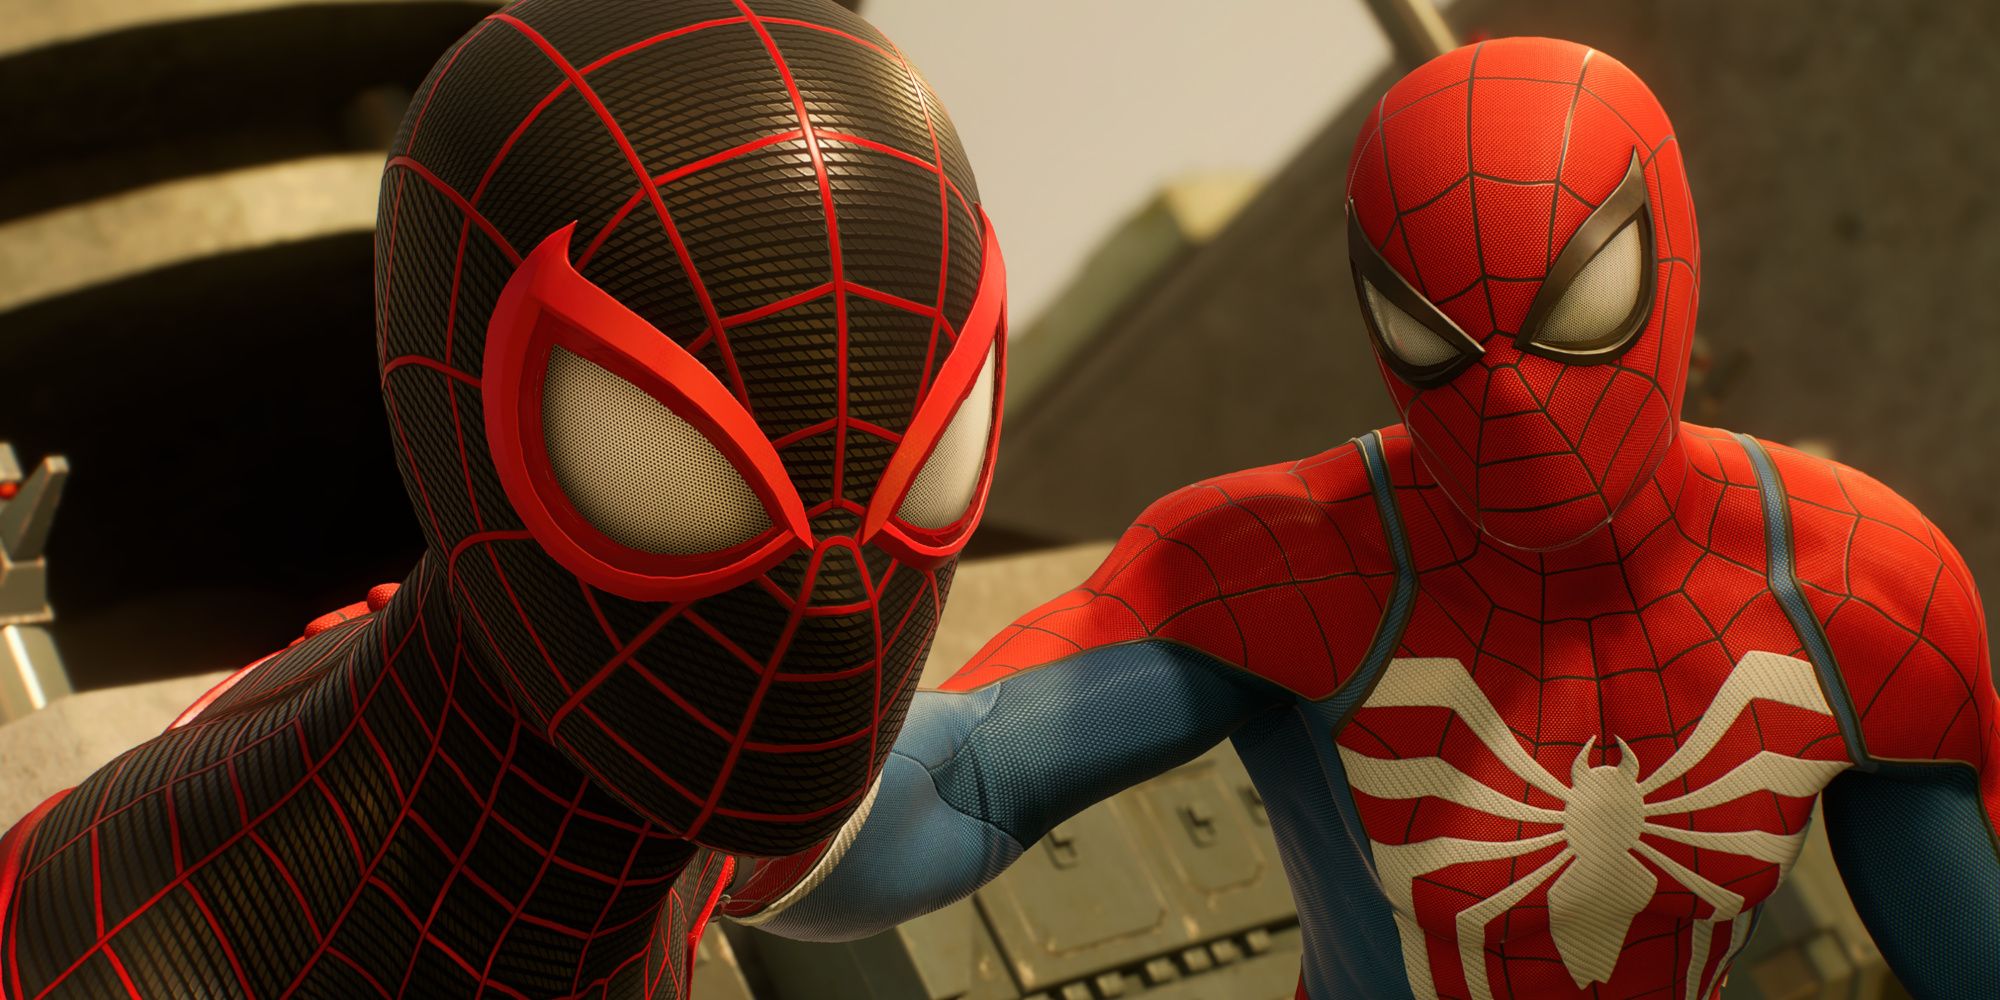 Miles and Peter as Spider-Men in Marvel's Spider-Man 2